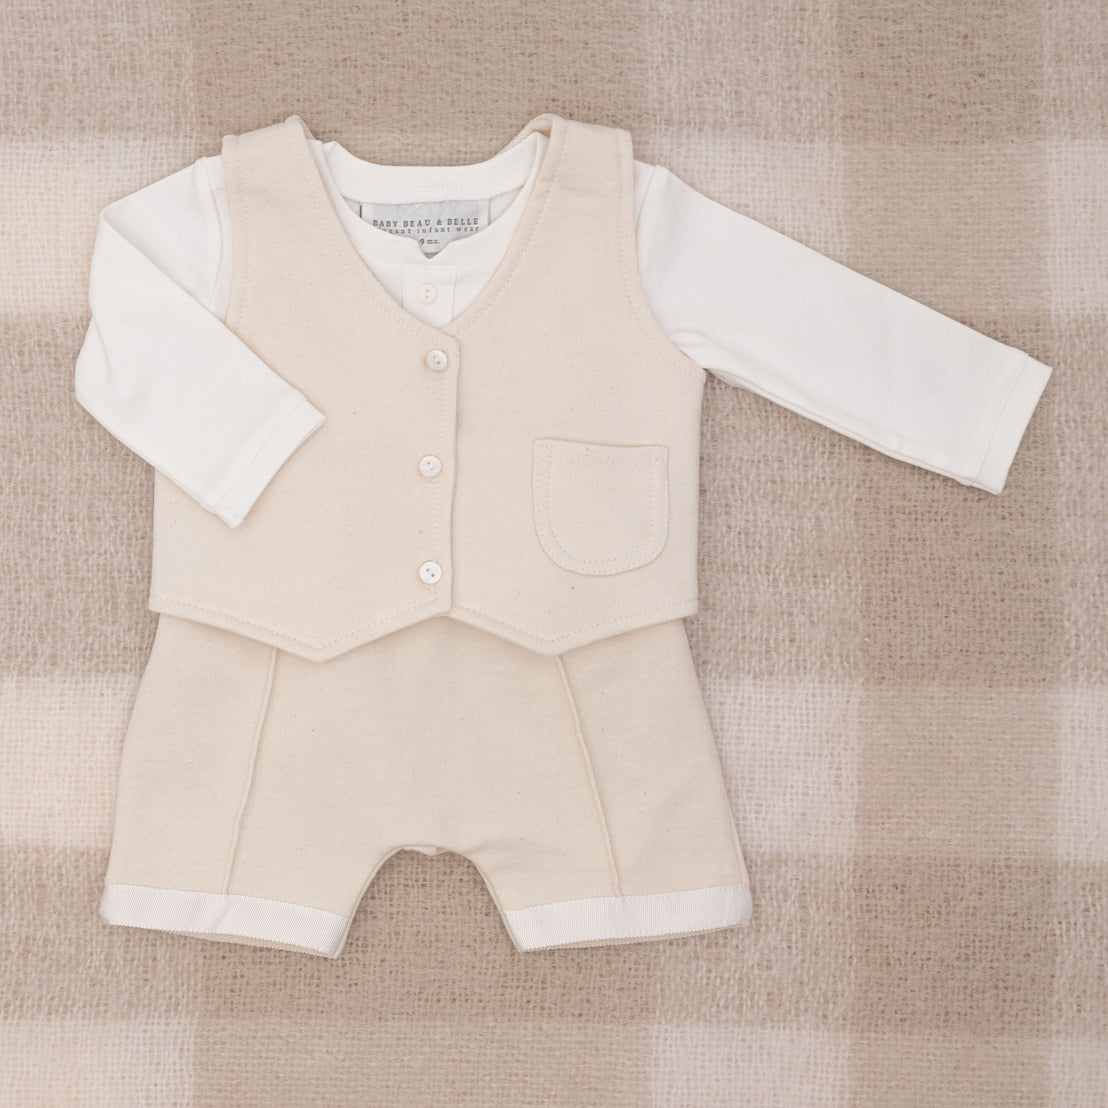 Flat lay photo of the Braden Vest Shorts Suit, including the vest, shorts, and onesie